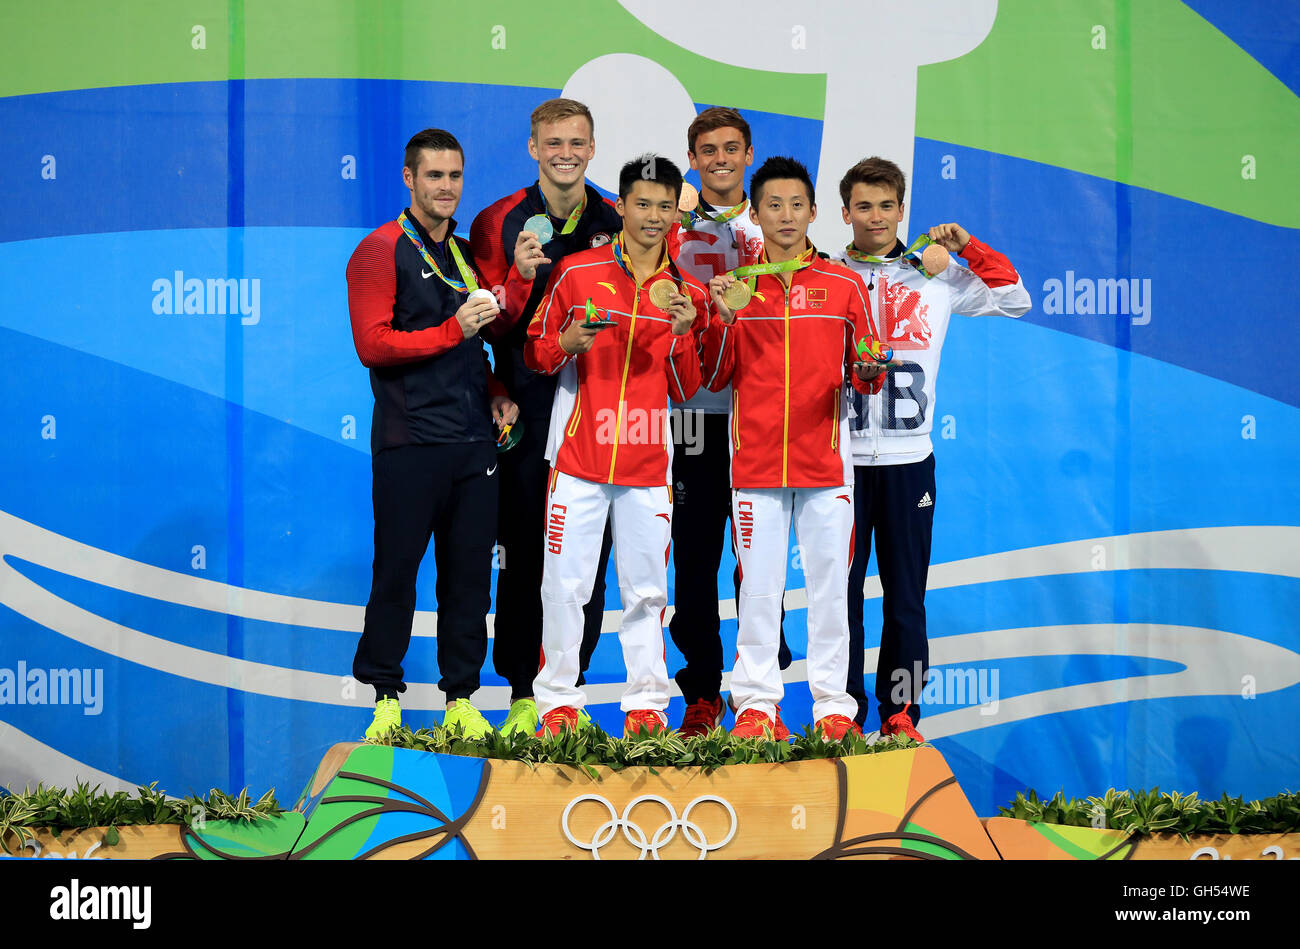 Great Britain's Tom Daley (third right) and Daniel Goodfellow (right) celebrate with their bronze medals alongside China's gold medal winners Aisen Chen (third right) and Yue Lin (second right), and silver medal winners USA's David Boudia (left) and Steele Johnson (second left) on the podium after the Men's Synchronised 10m Platform Final at the Maria Lenk Aquatics Centre on the third day of the Rio Olympic Games, Brazil. Stock Photo